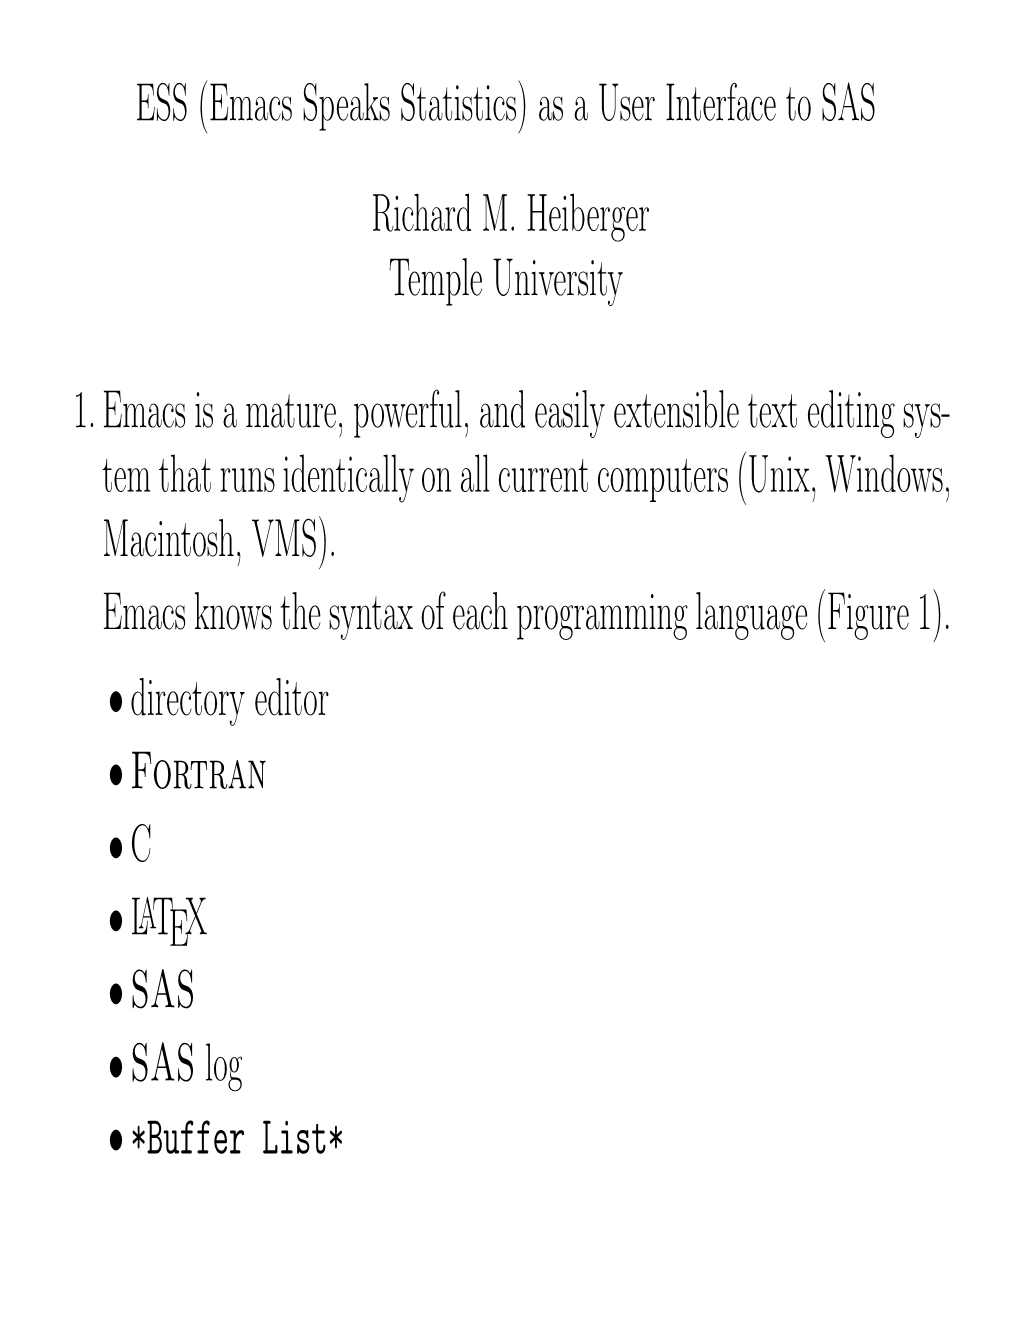 ESS (Emacs Speaks Statistics) As a User Interface to SAS